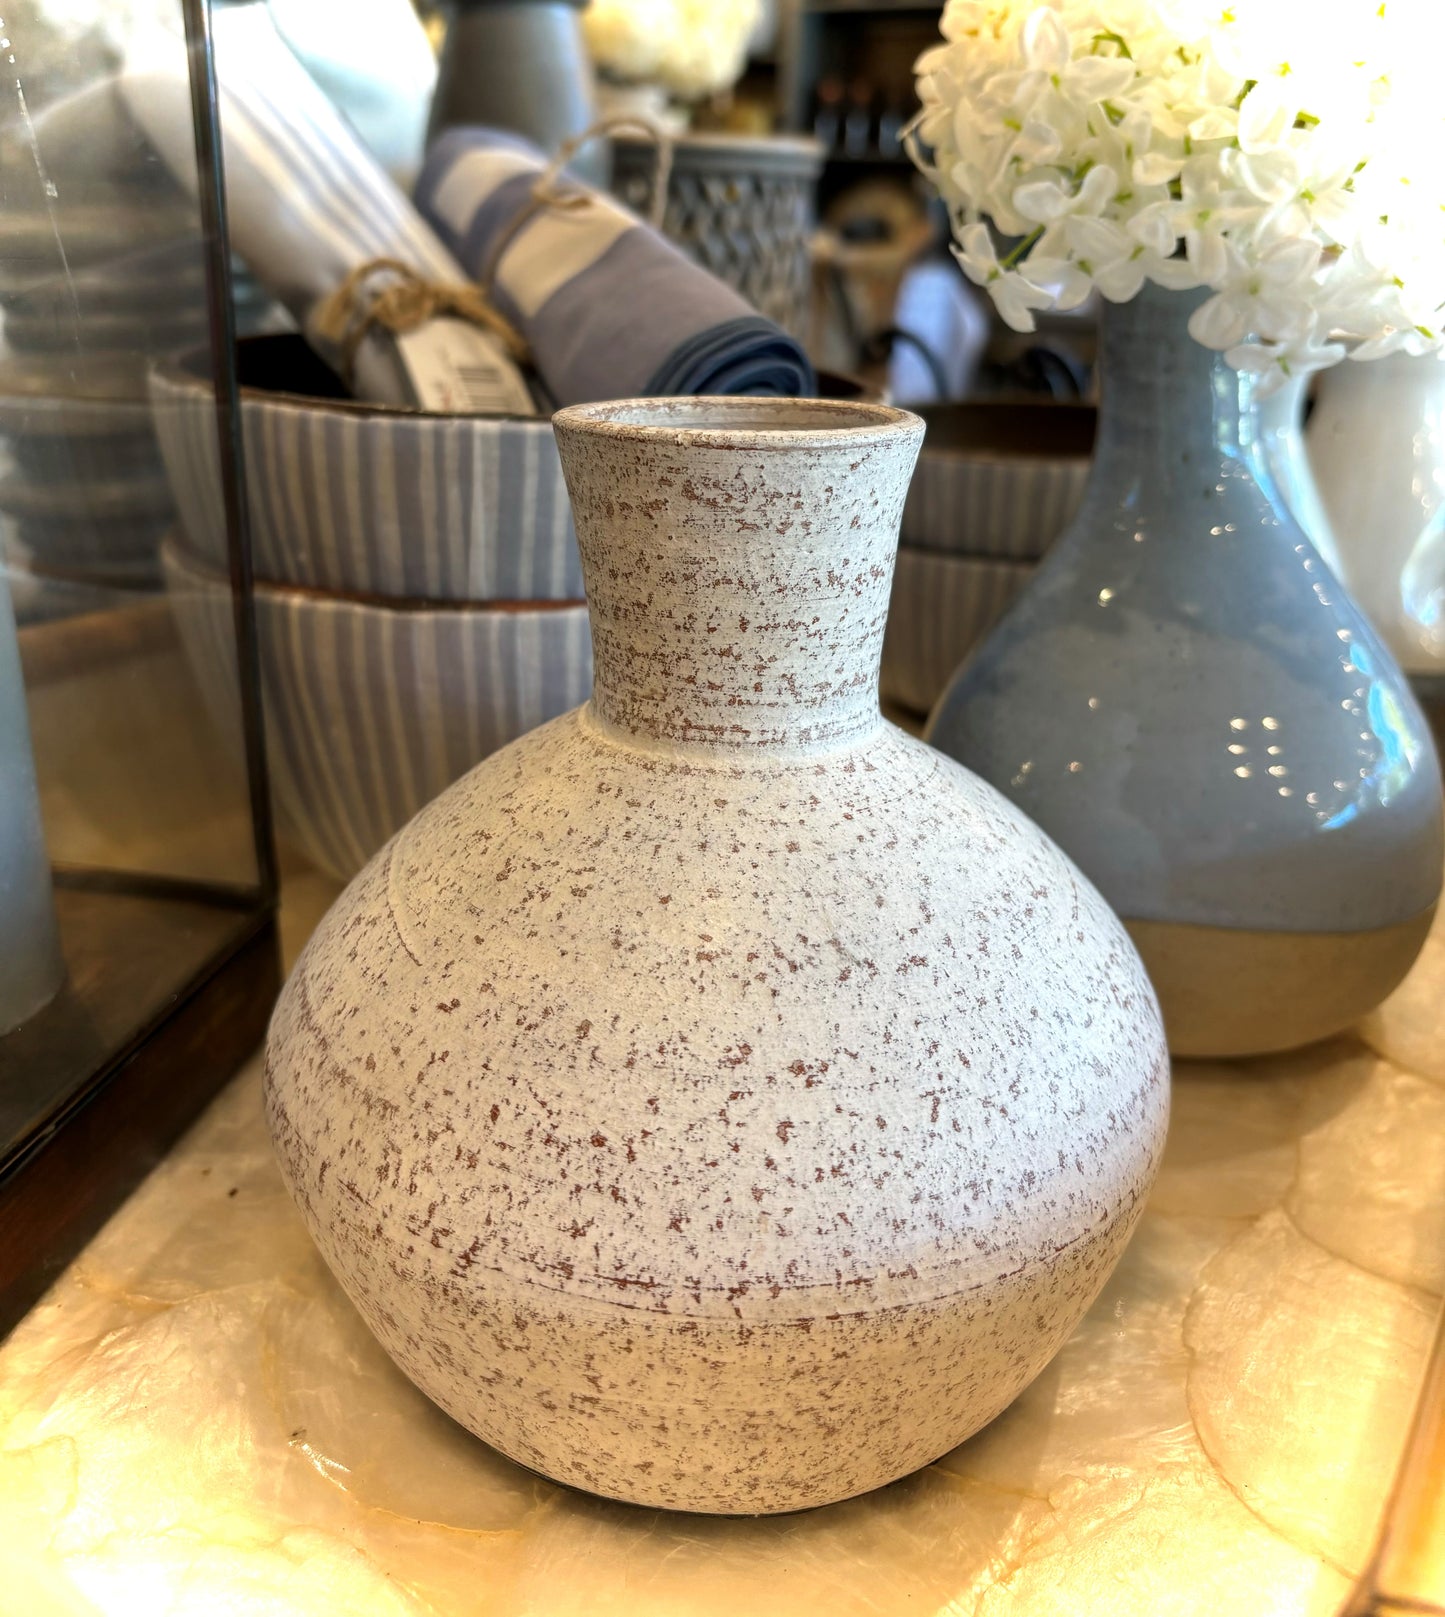 The beautiful Rocco Rustic Terracotta Vase vase with neutral white tones makes it perfect for the bedroom, to place on a bedside table or as part of the living room decor.